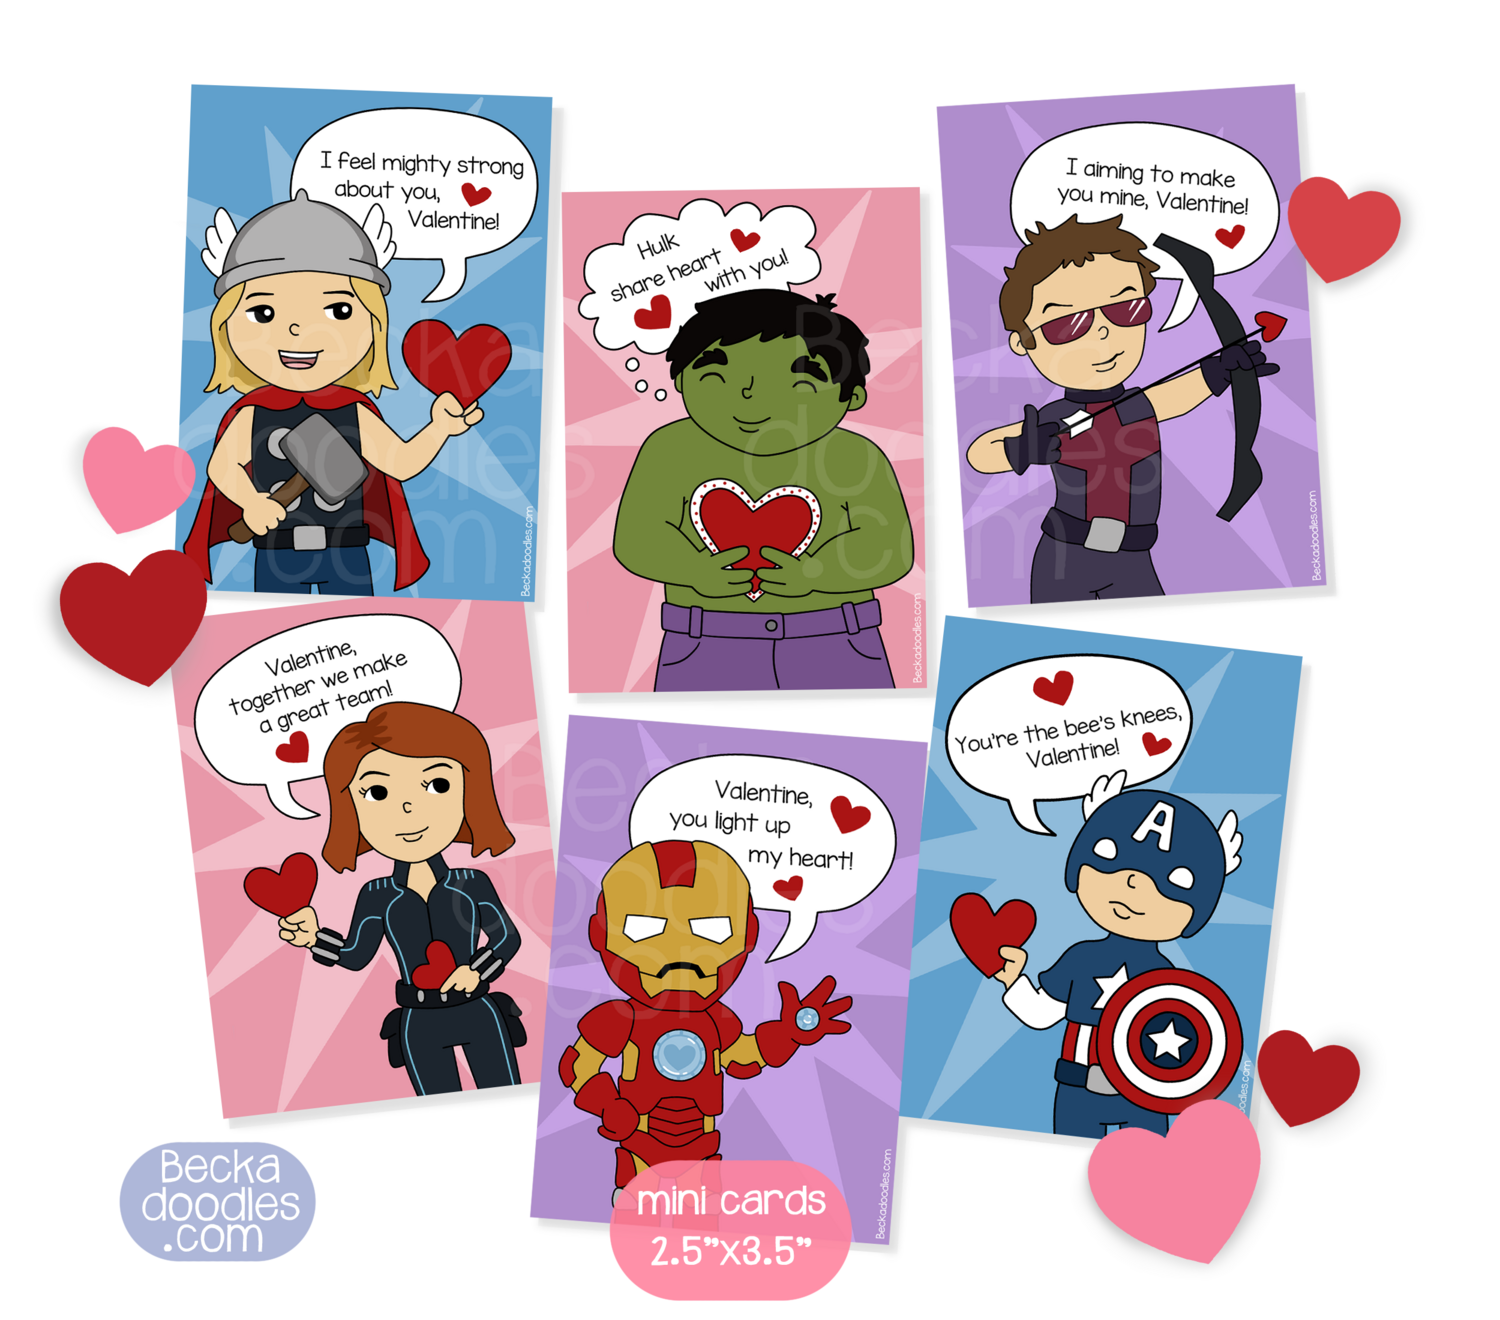 Avenger Heroes Inspired Mini Valentine's Day Card Packs - 2.5x3.5 inch cards